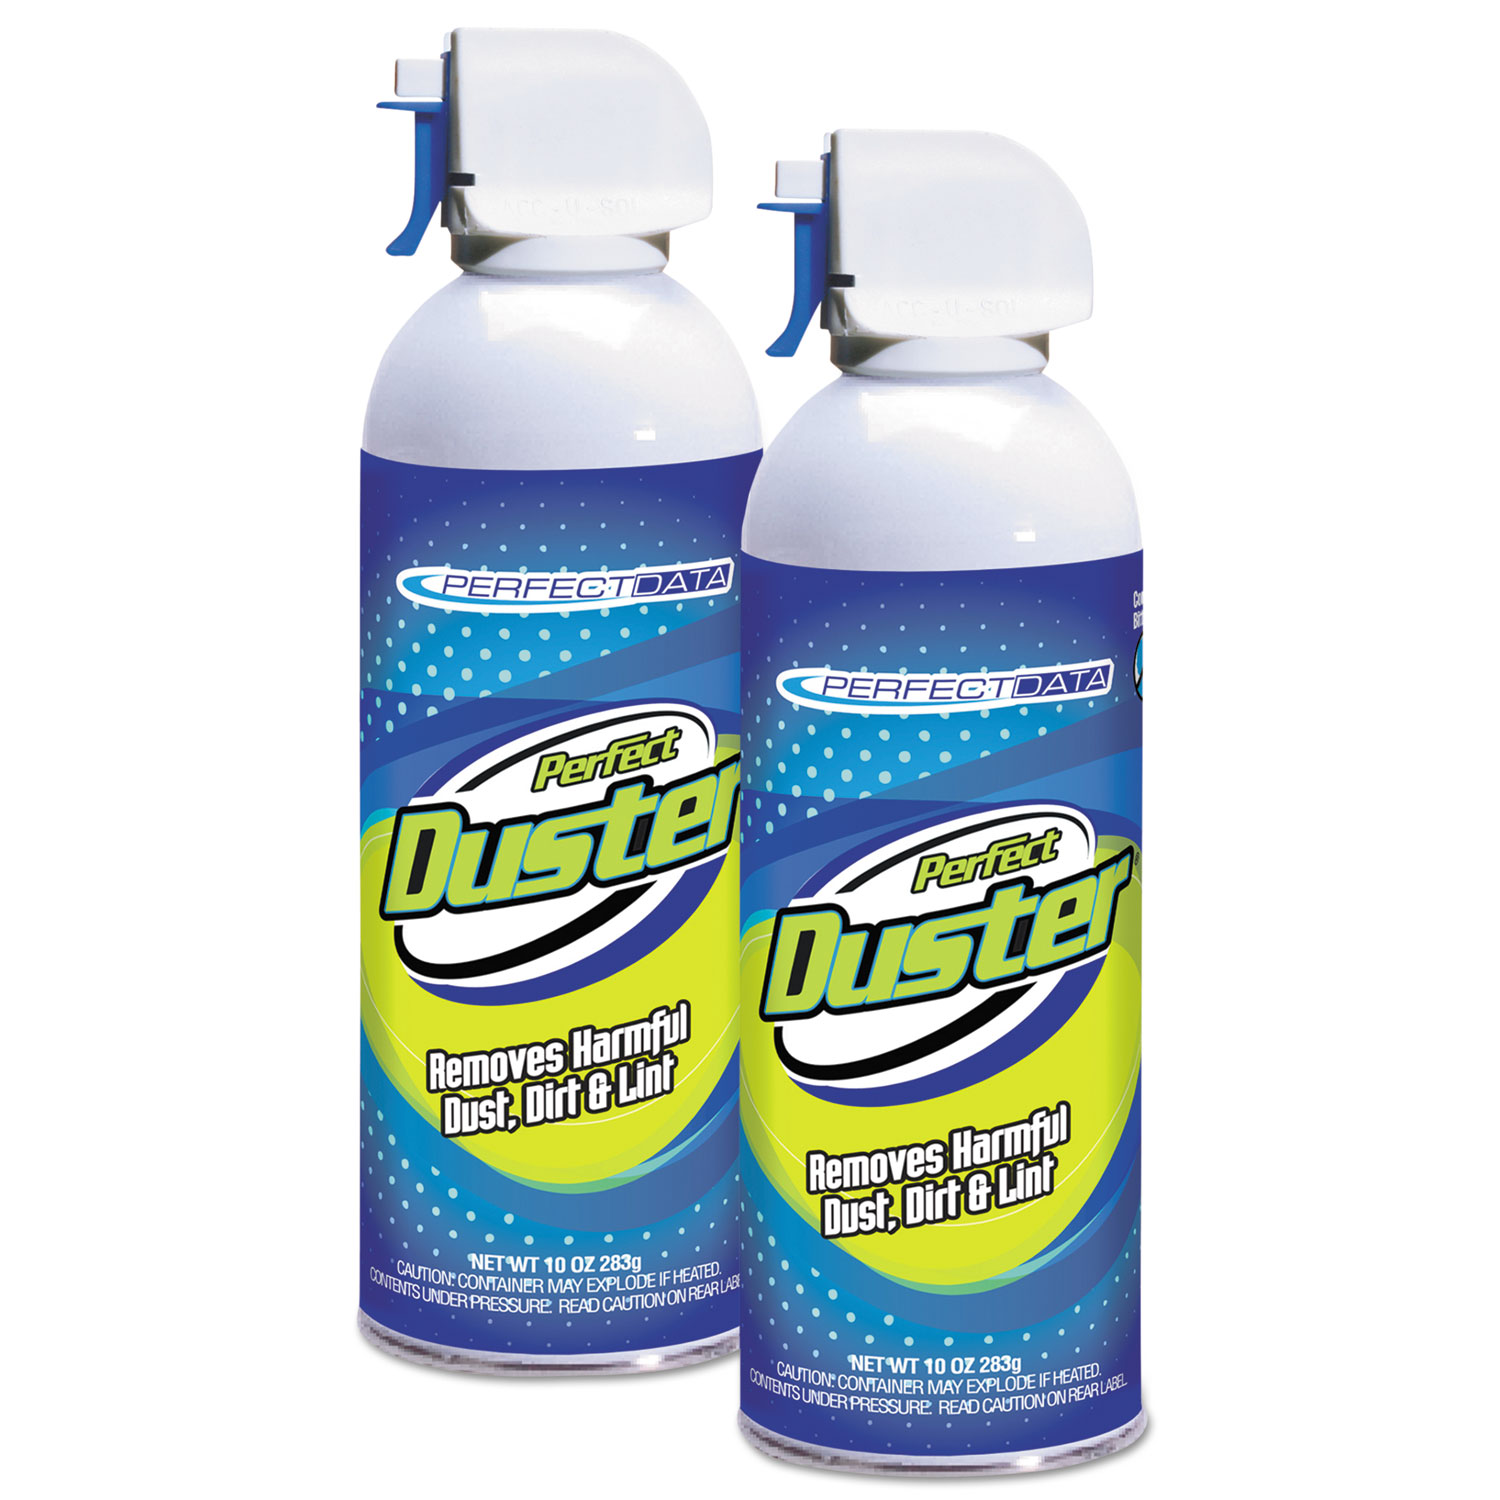  Perfect Duster 106032-5 Power Duster, 10 oz Can, 2/Pk (PDC1060325) 